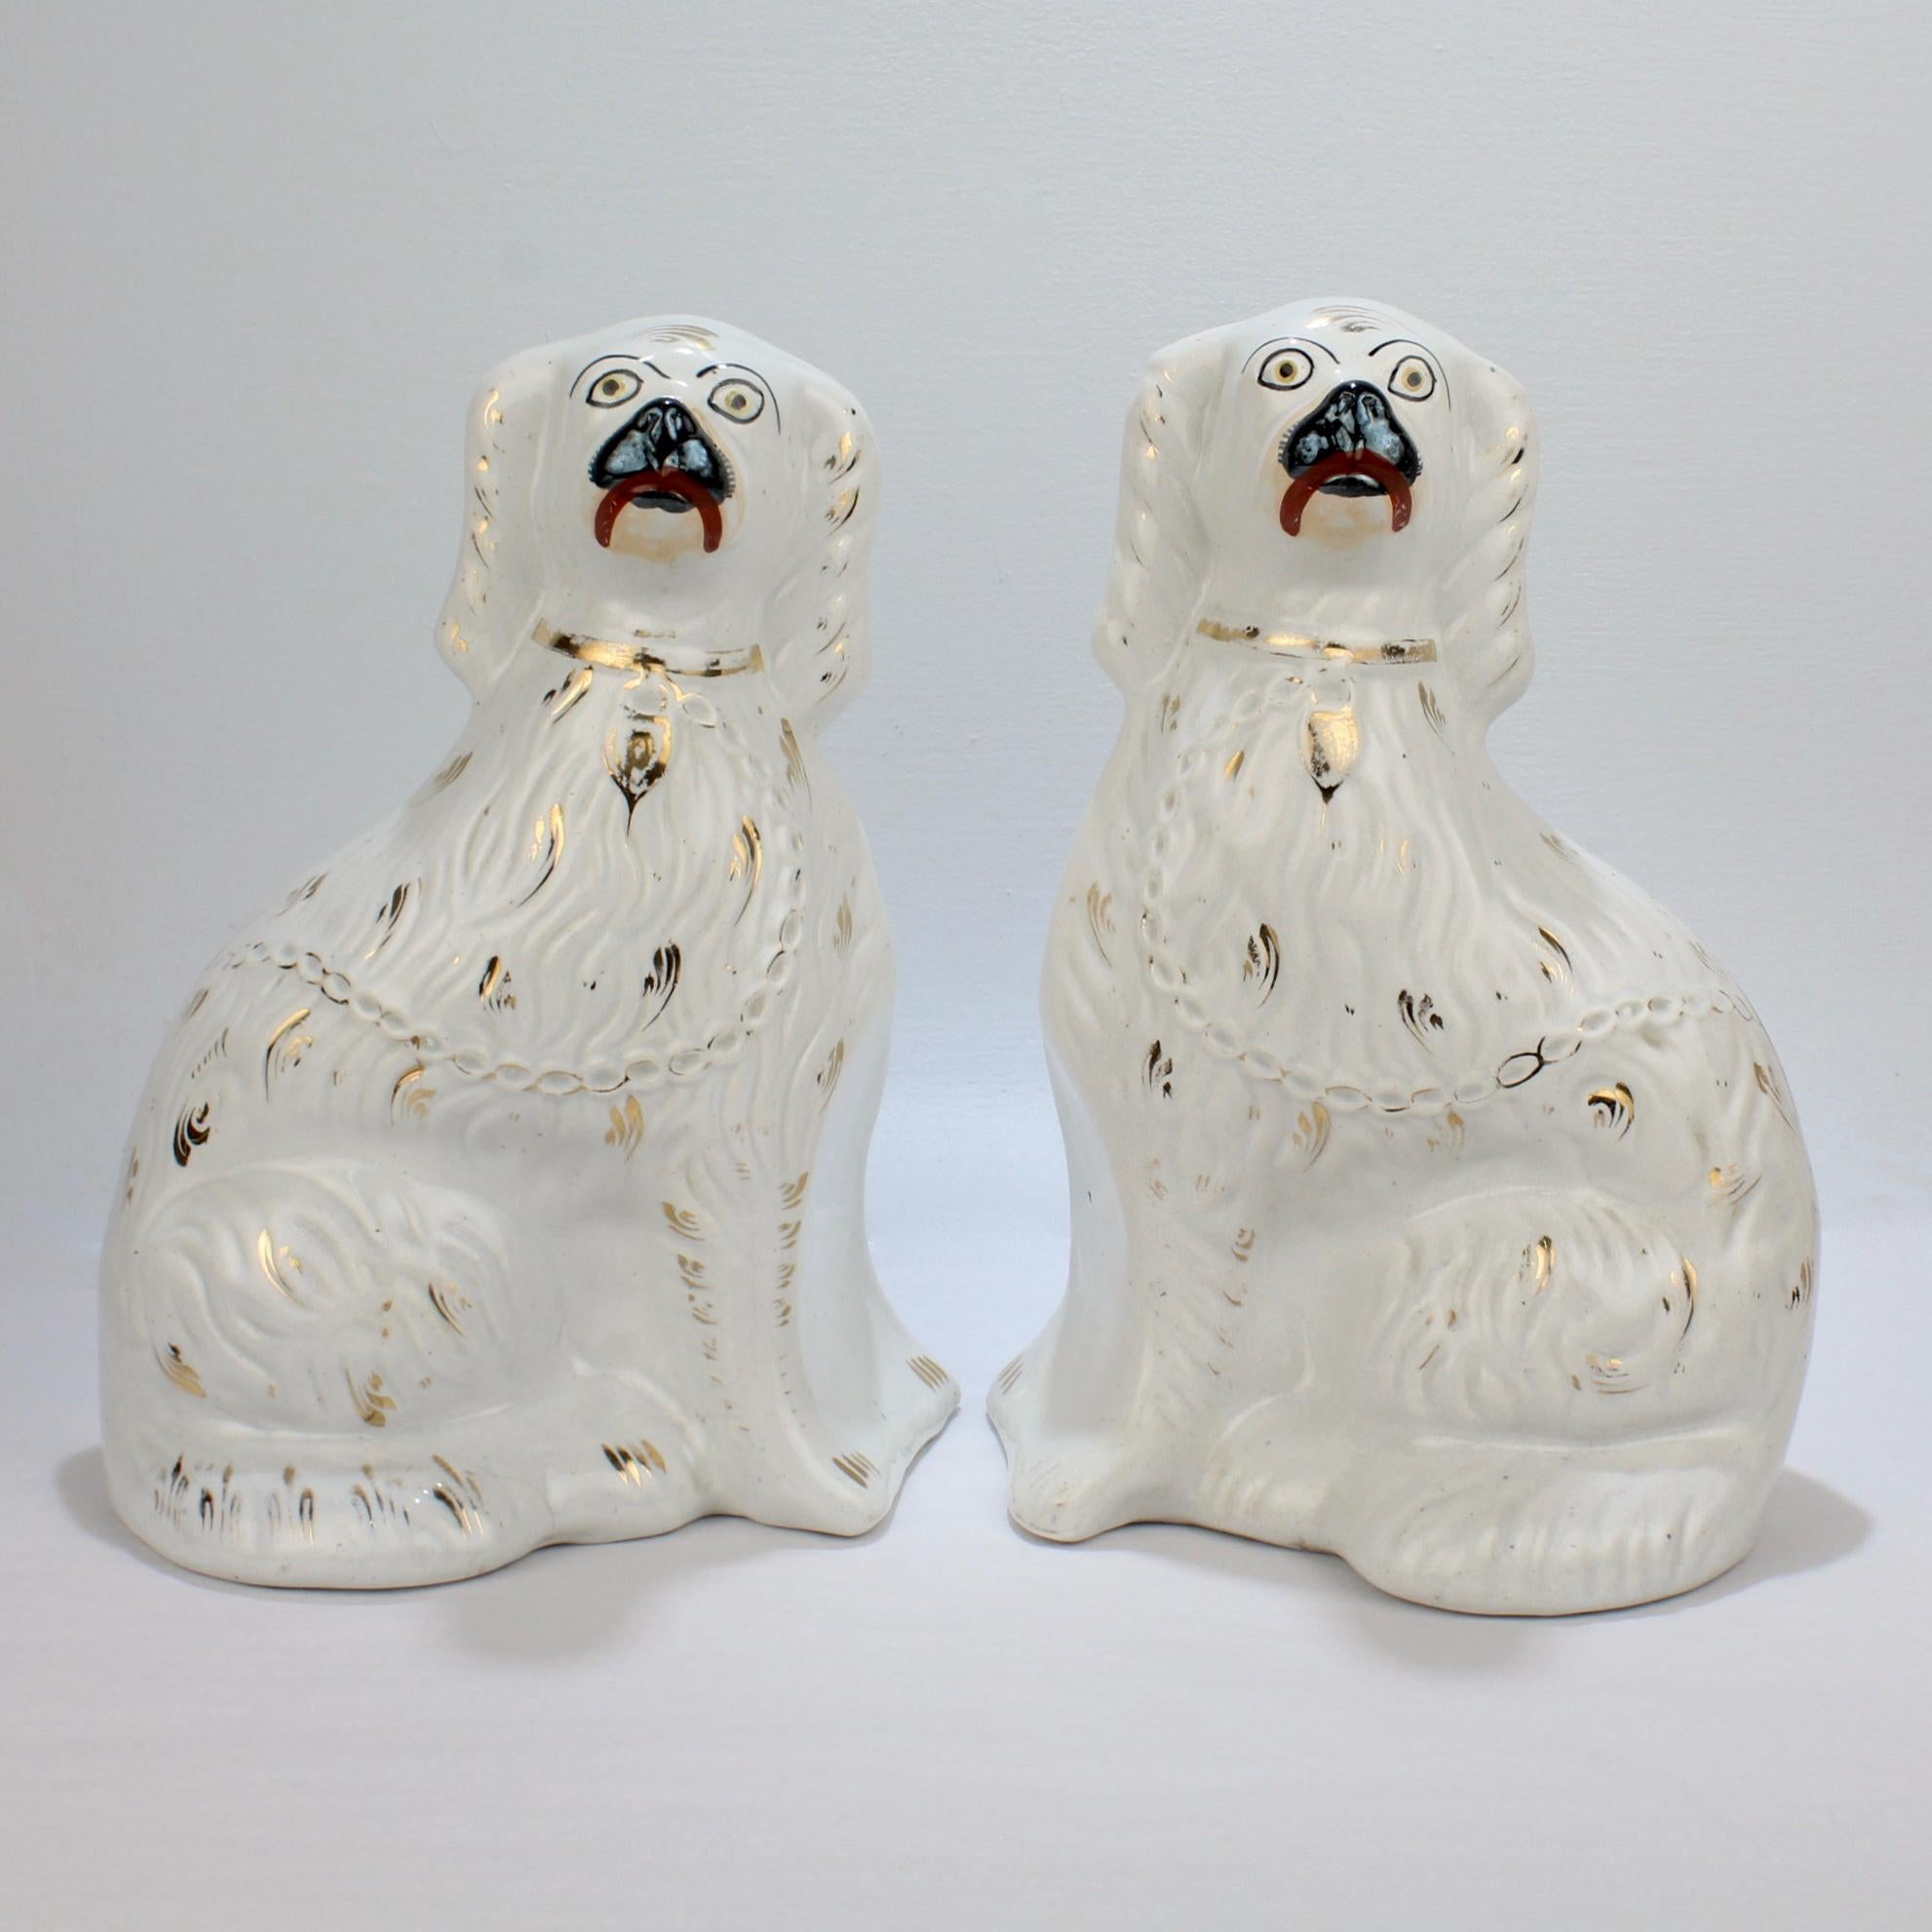 A fine pair of antique Staffordshire pottery spaniels. 

These wonderful dogs have raised faux chains and gilt collars, as well as gold spot decorations throughout. 

They are a matched, complementary pair. 

Height of taller dog: ca. 12 1/2